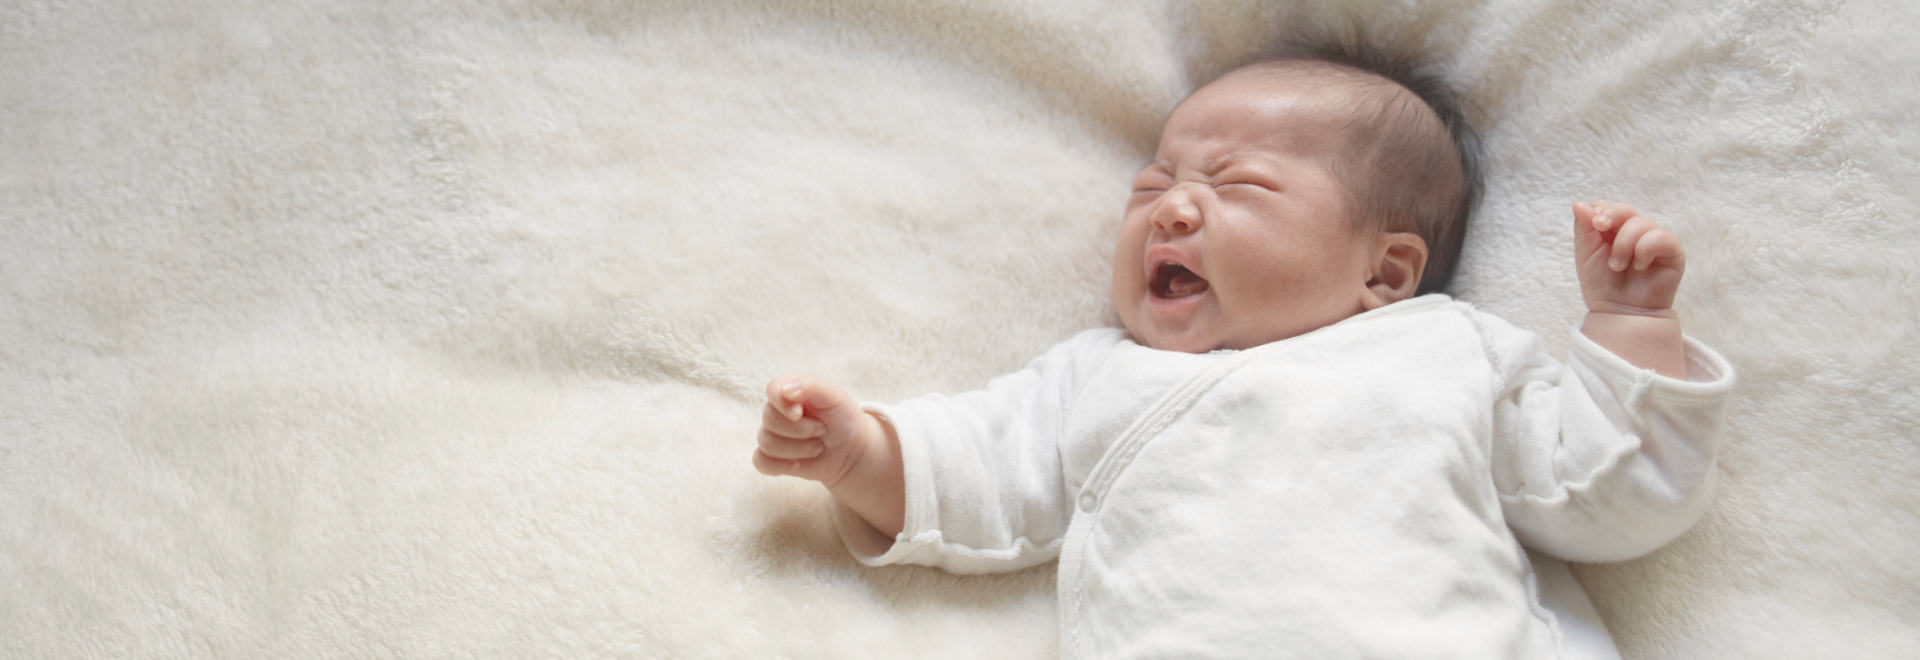 reasons-babies-cry-and-how-to-soothe-them